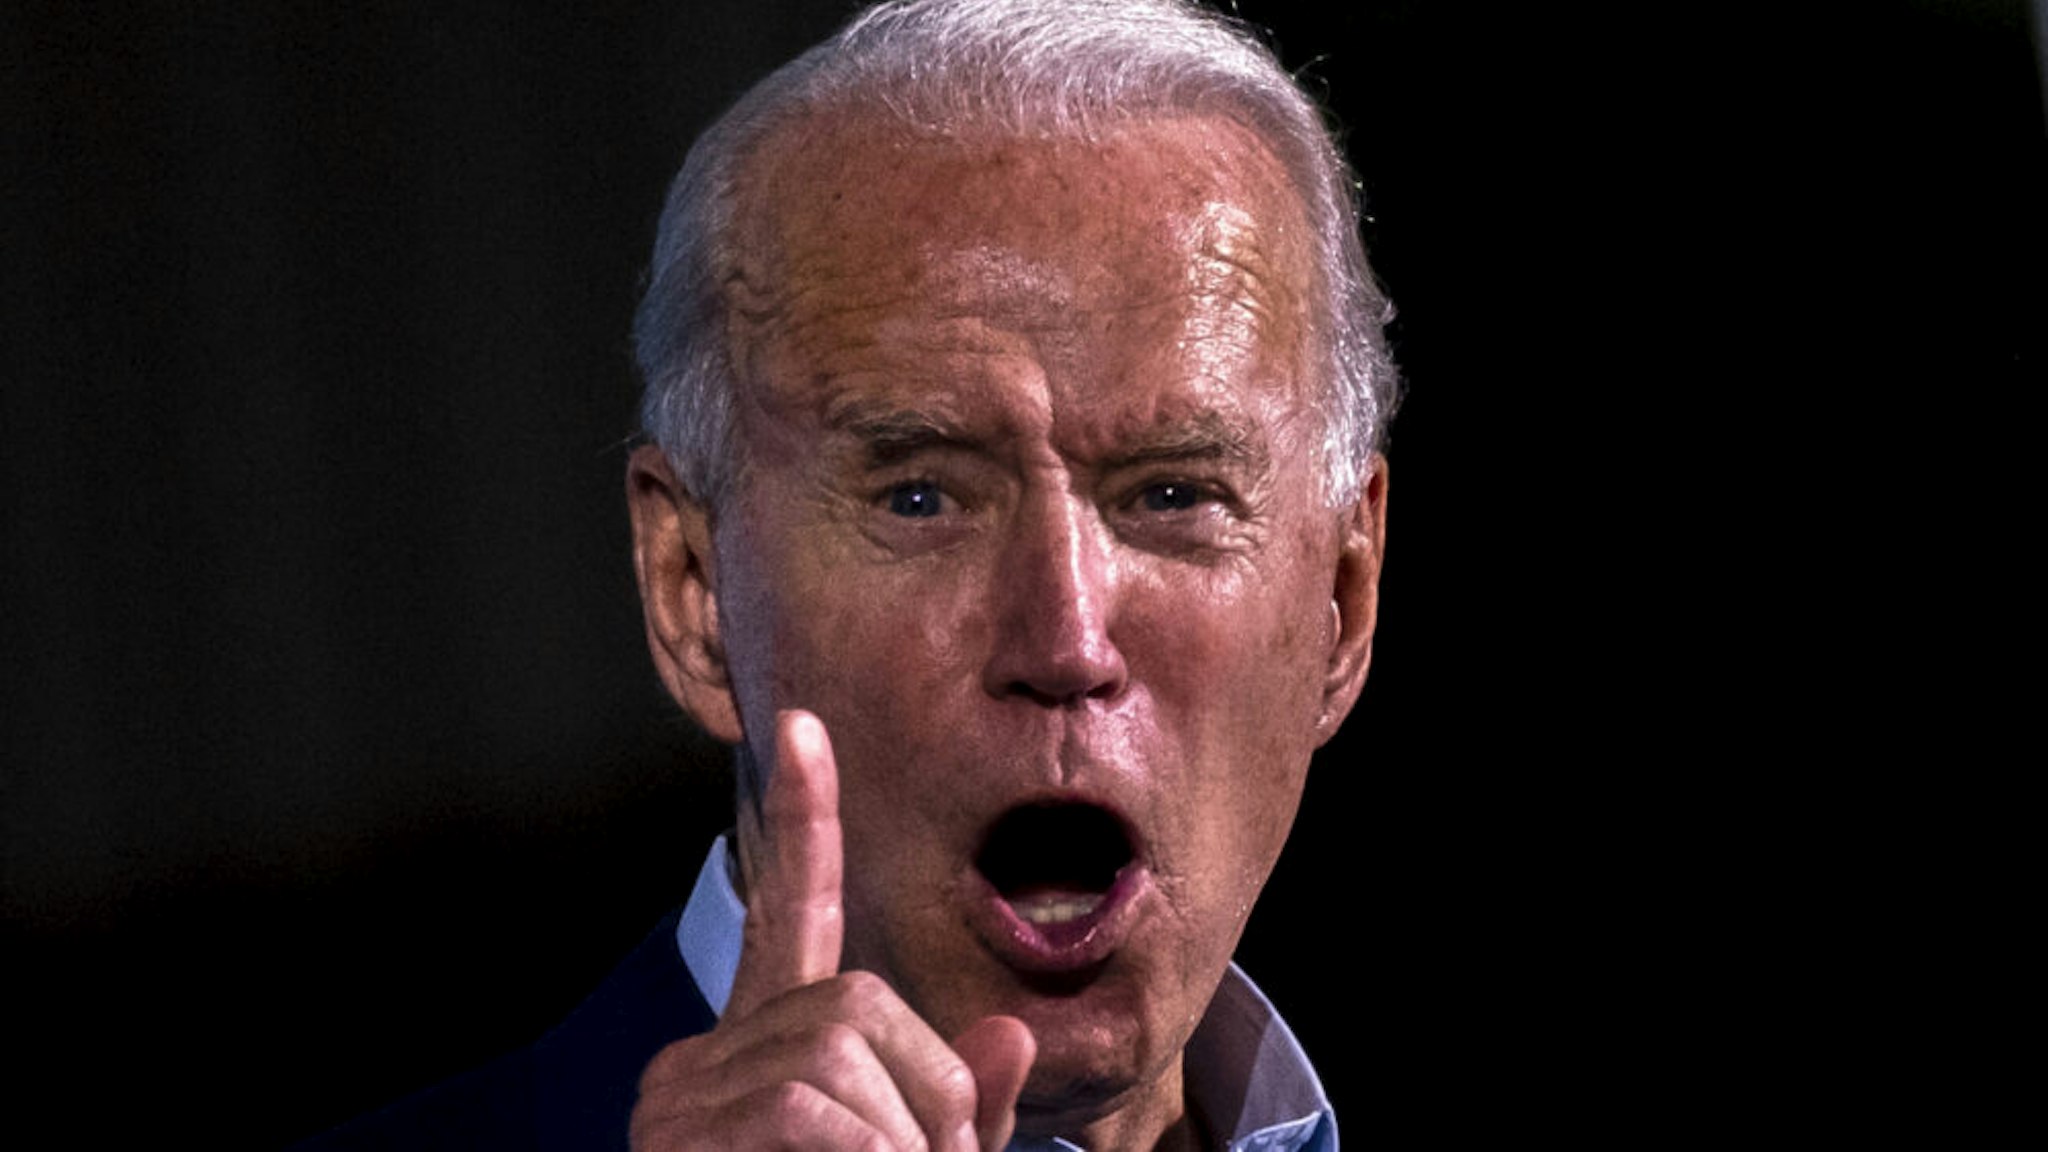 Former vice-president and Democratic presidential nominee Joe Biden delivers remarks during a Drive-In event in Tampa, Florida, on October 29, 2020.